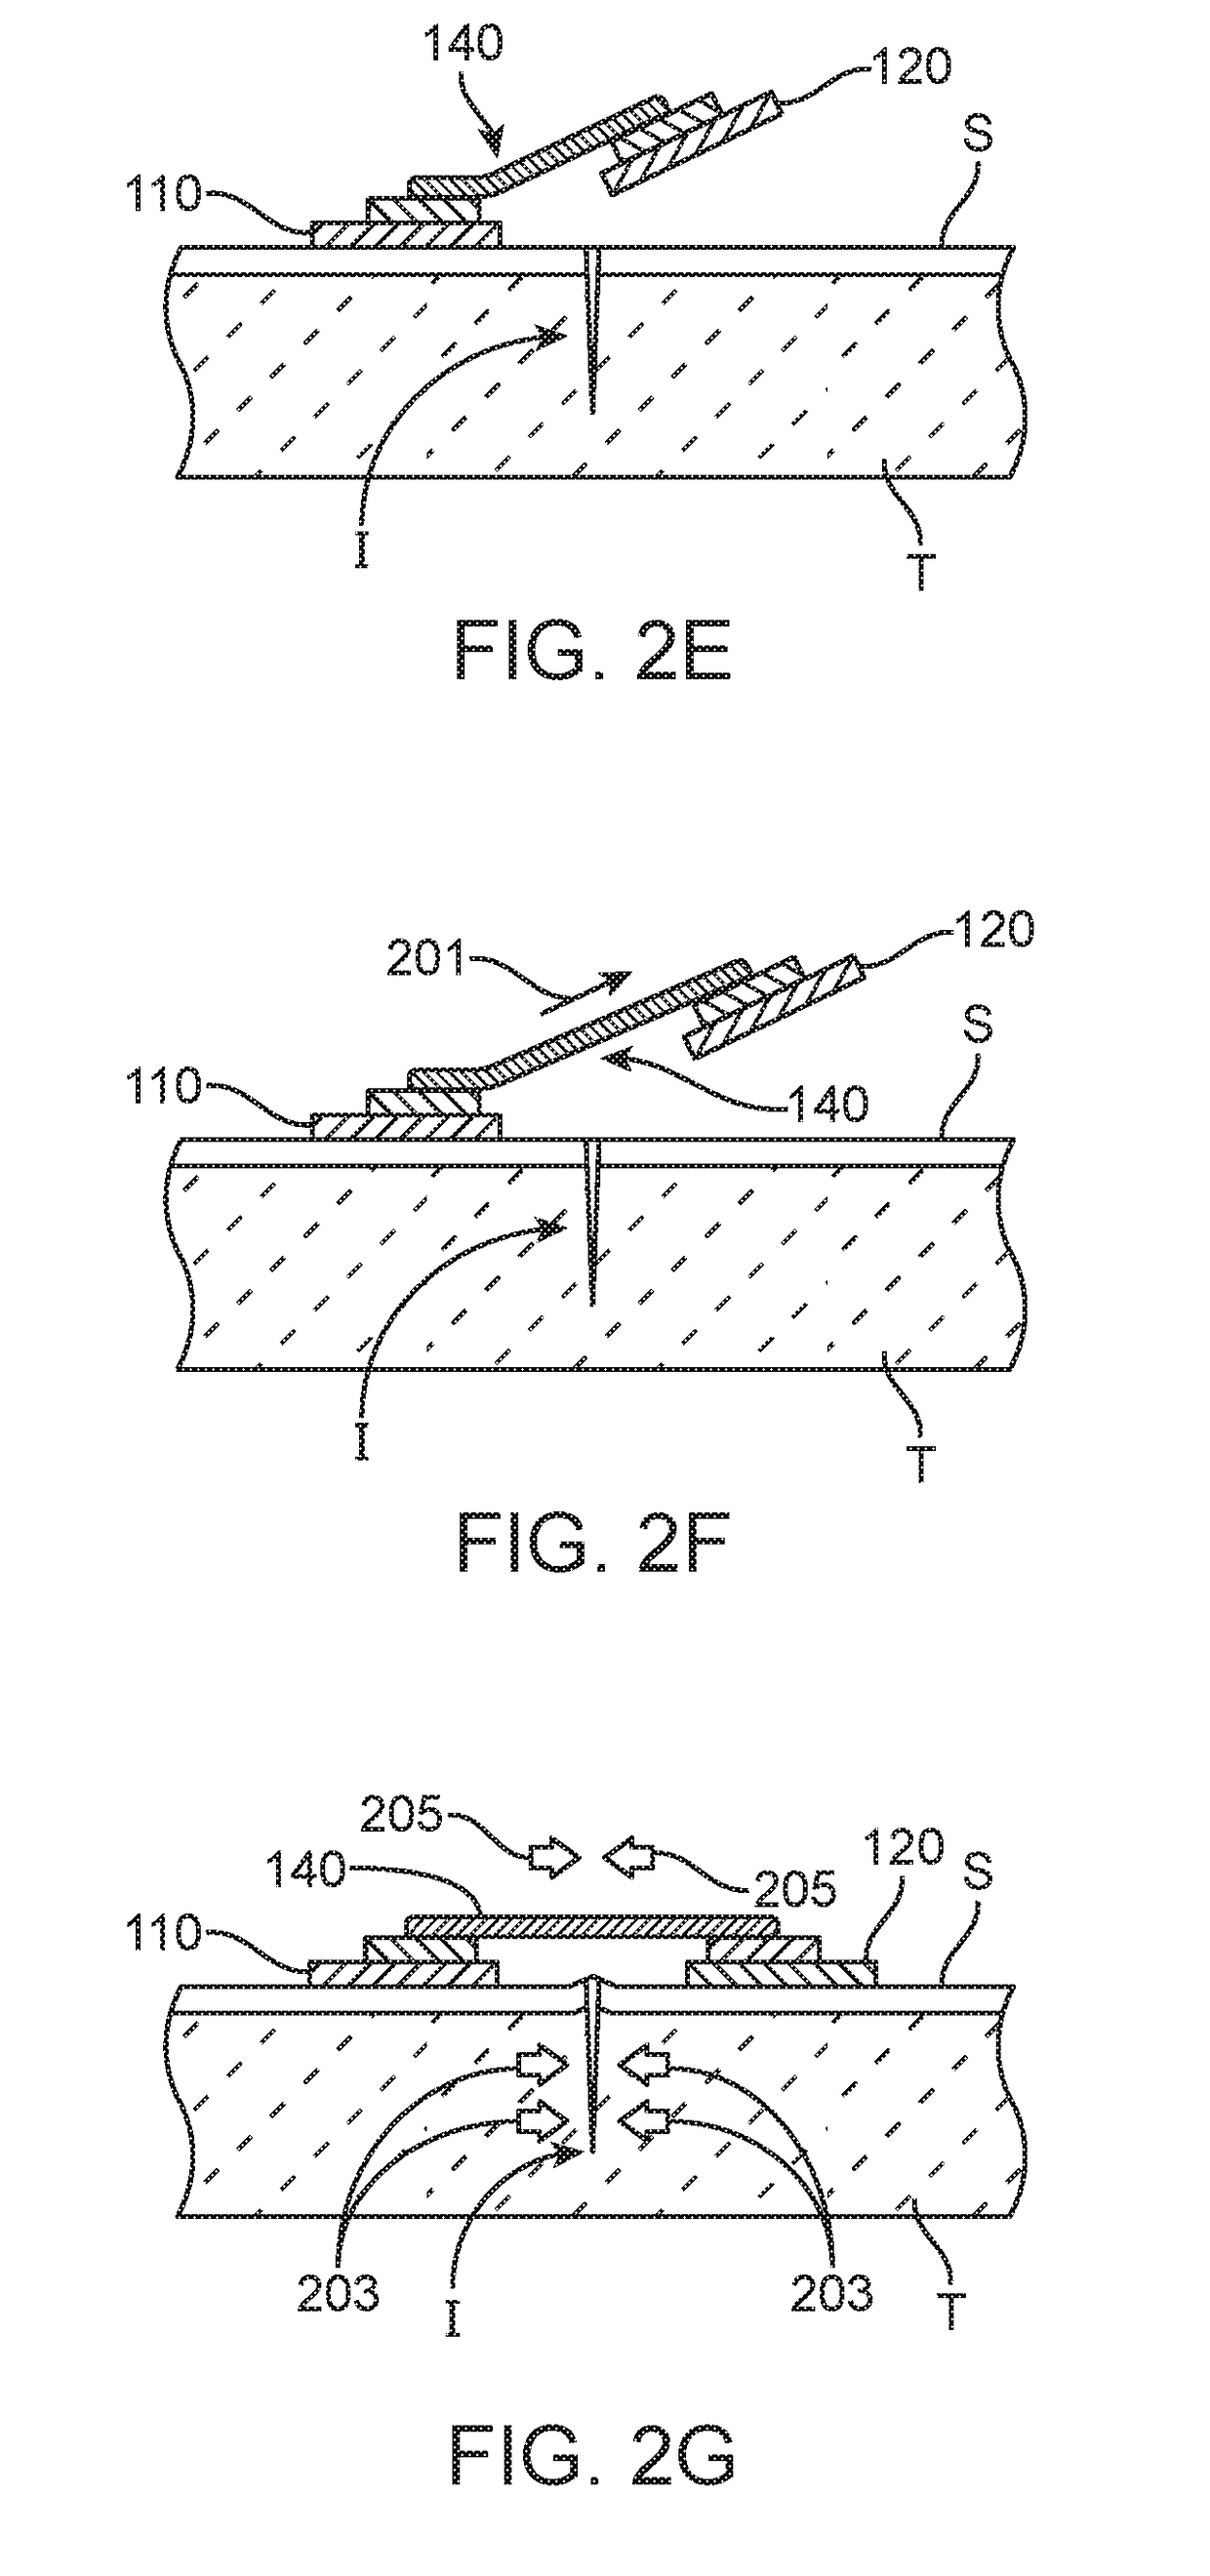 Devices and methods for inhibiting scar formation in a healing wound or incision